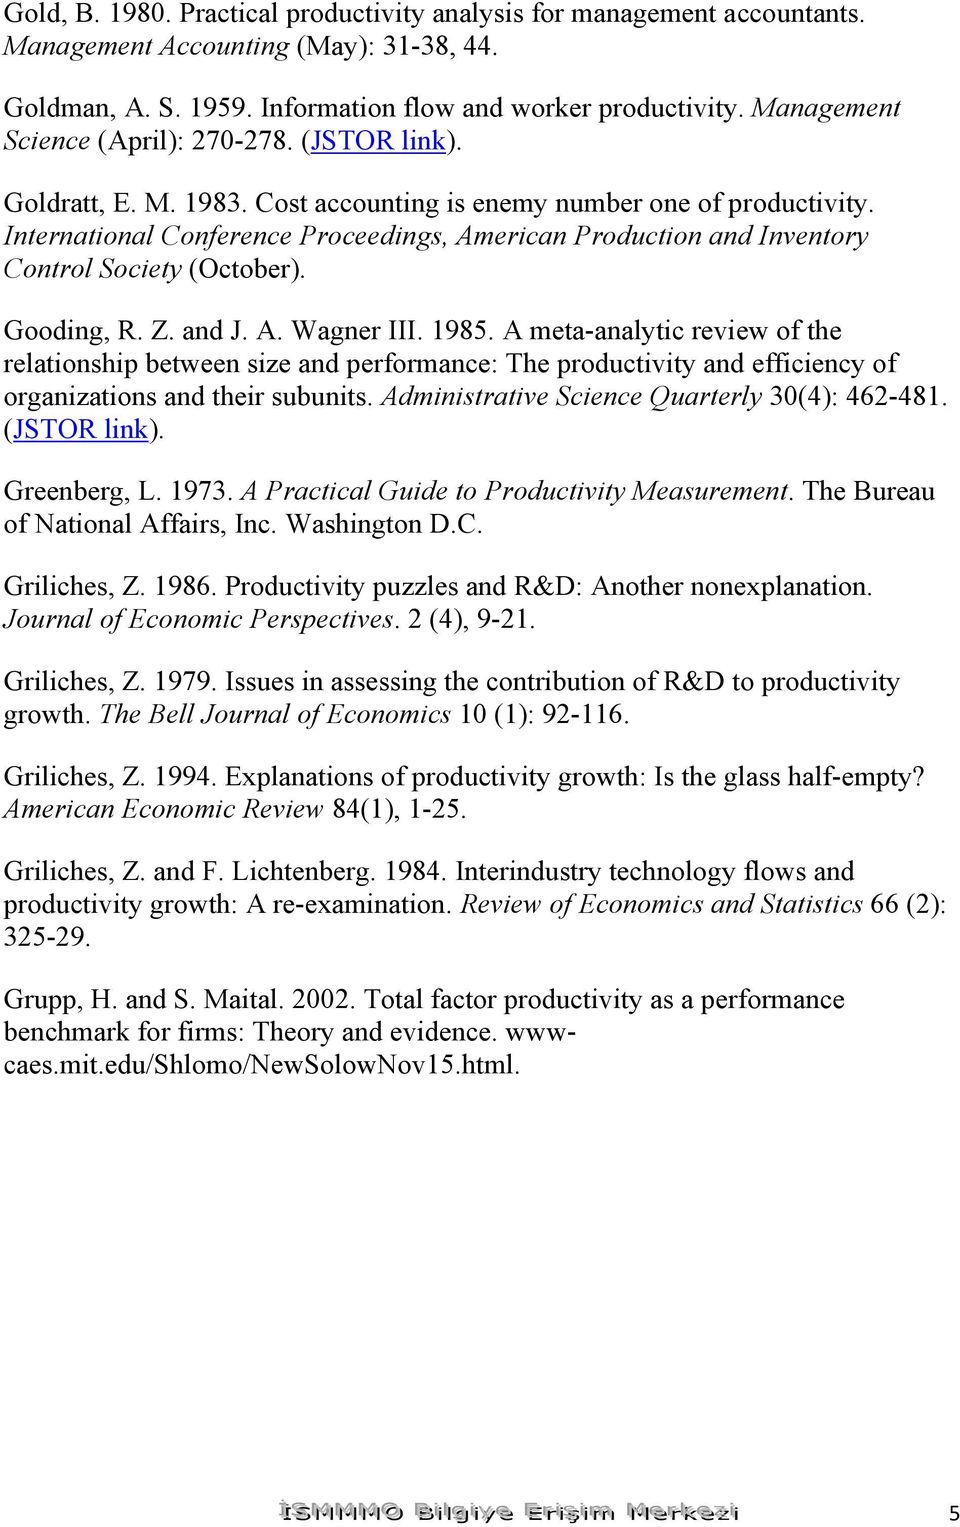 International Conference Proceedings, American Production and Inventory Control Society (October). Gooding, R. Z. and J. A. Wagner III. 1985.